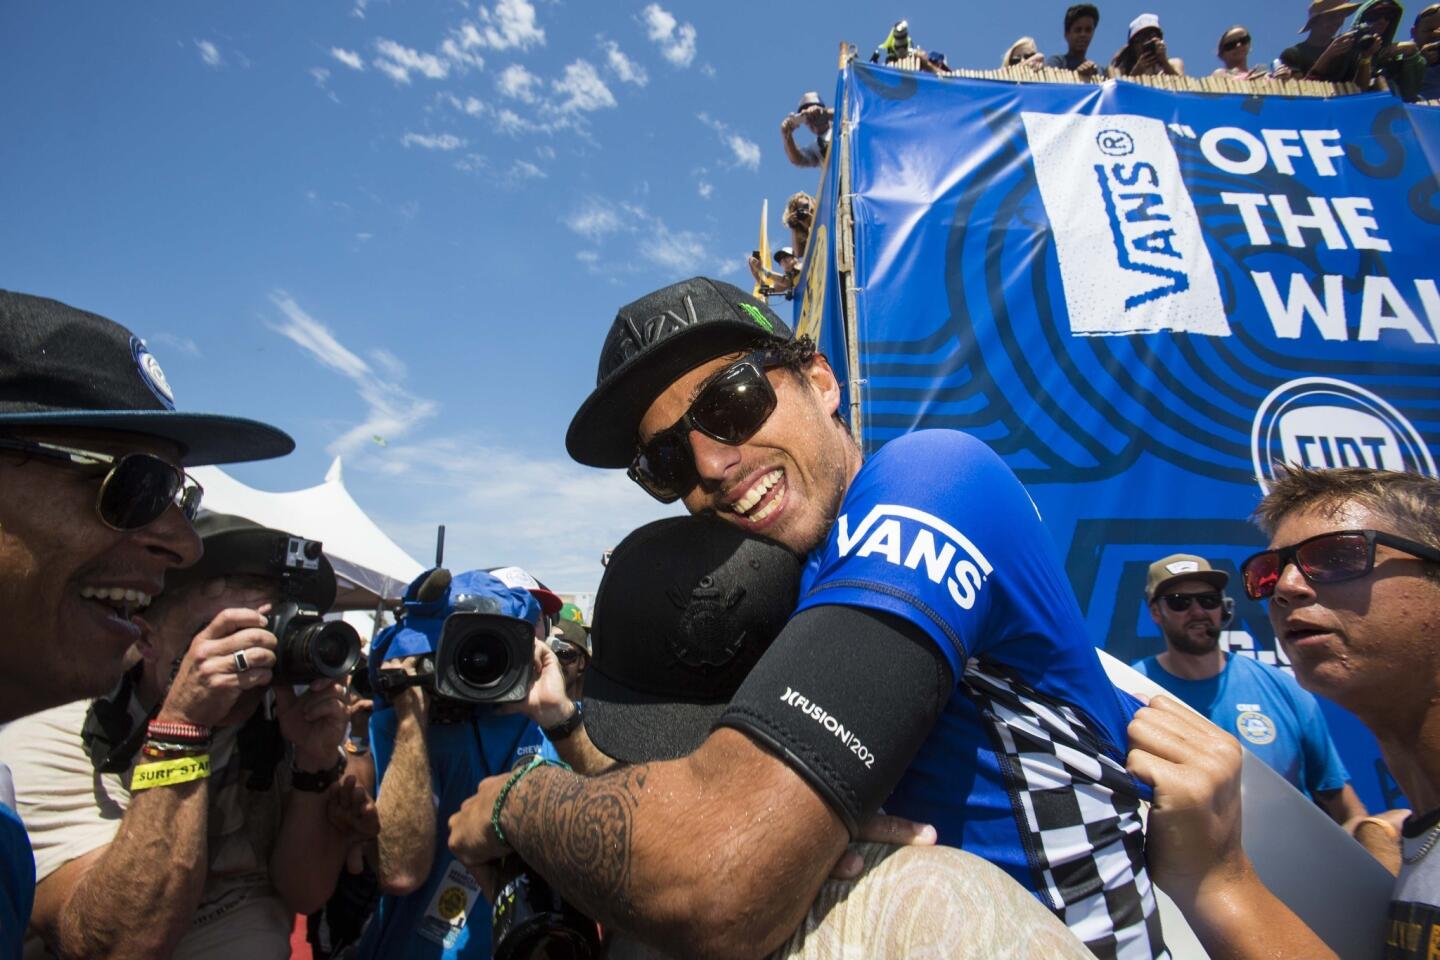 Filipe Toledo celebrates with family and friends after winning the U.S. Open of Surfing men's championship on Sunday afternoon in Huntington Beach.